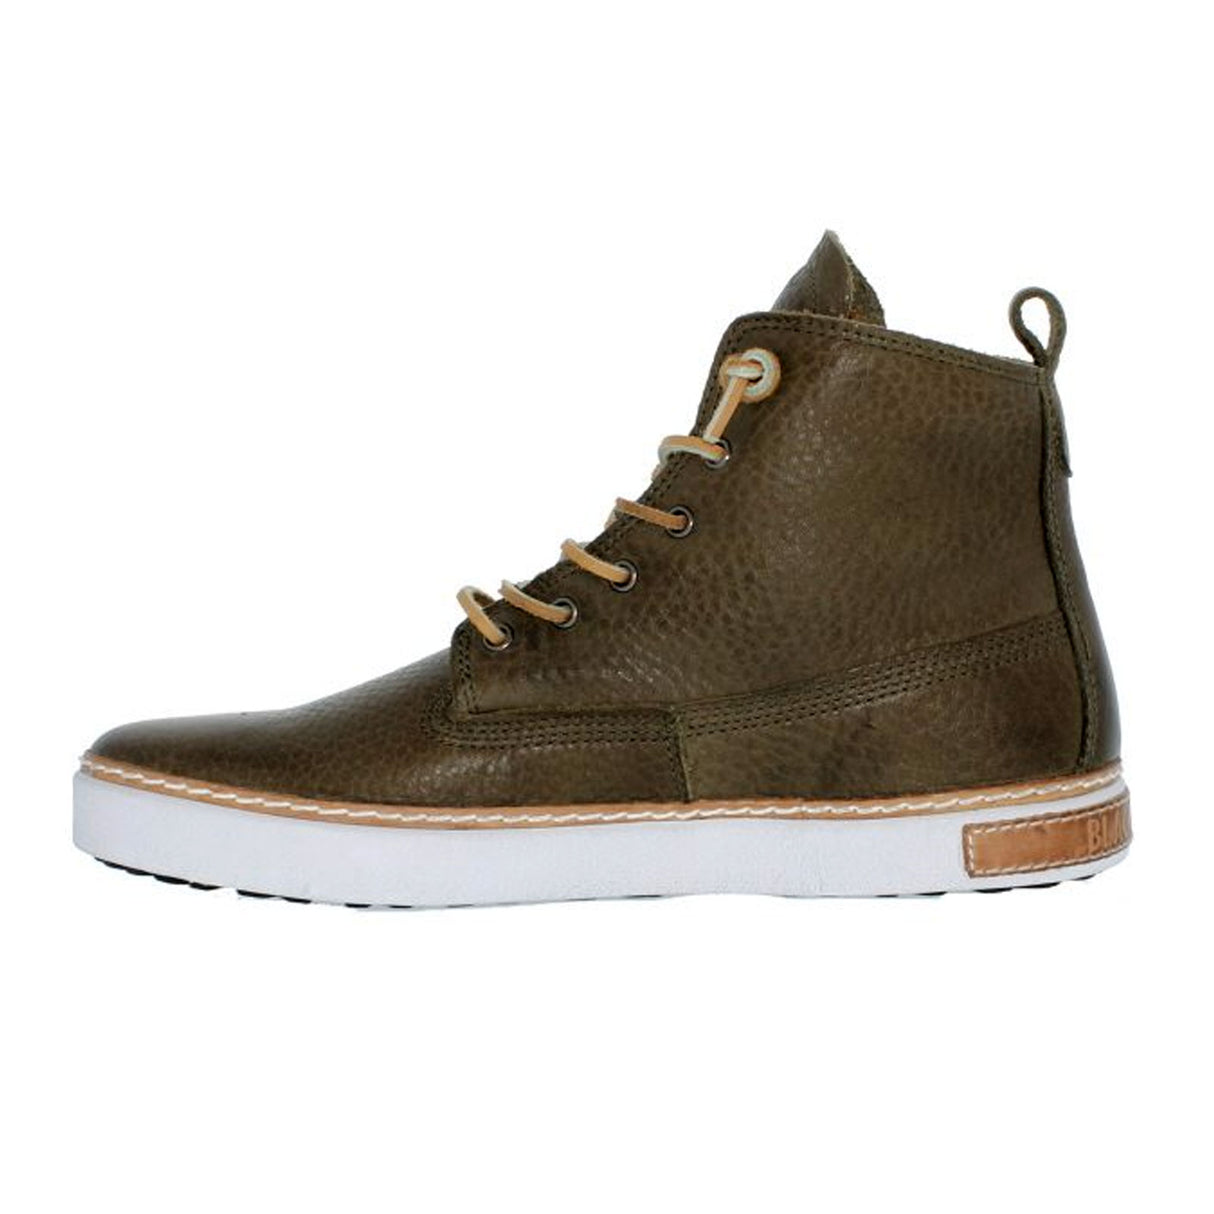 Blackstone AM02 LW High Top Sneaker (Unisex) - Olive Boots - Winter - Mid Boot - The Heel Shoe Fitters